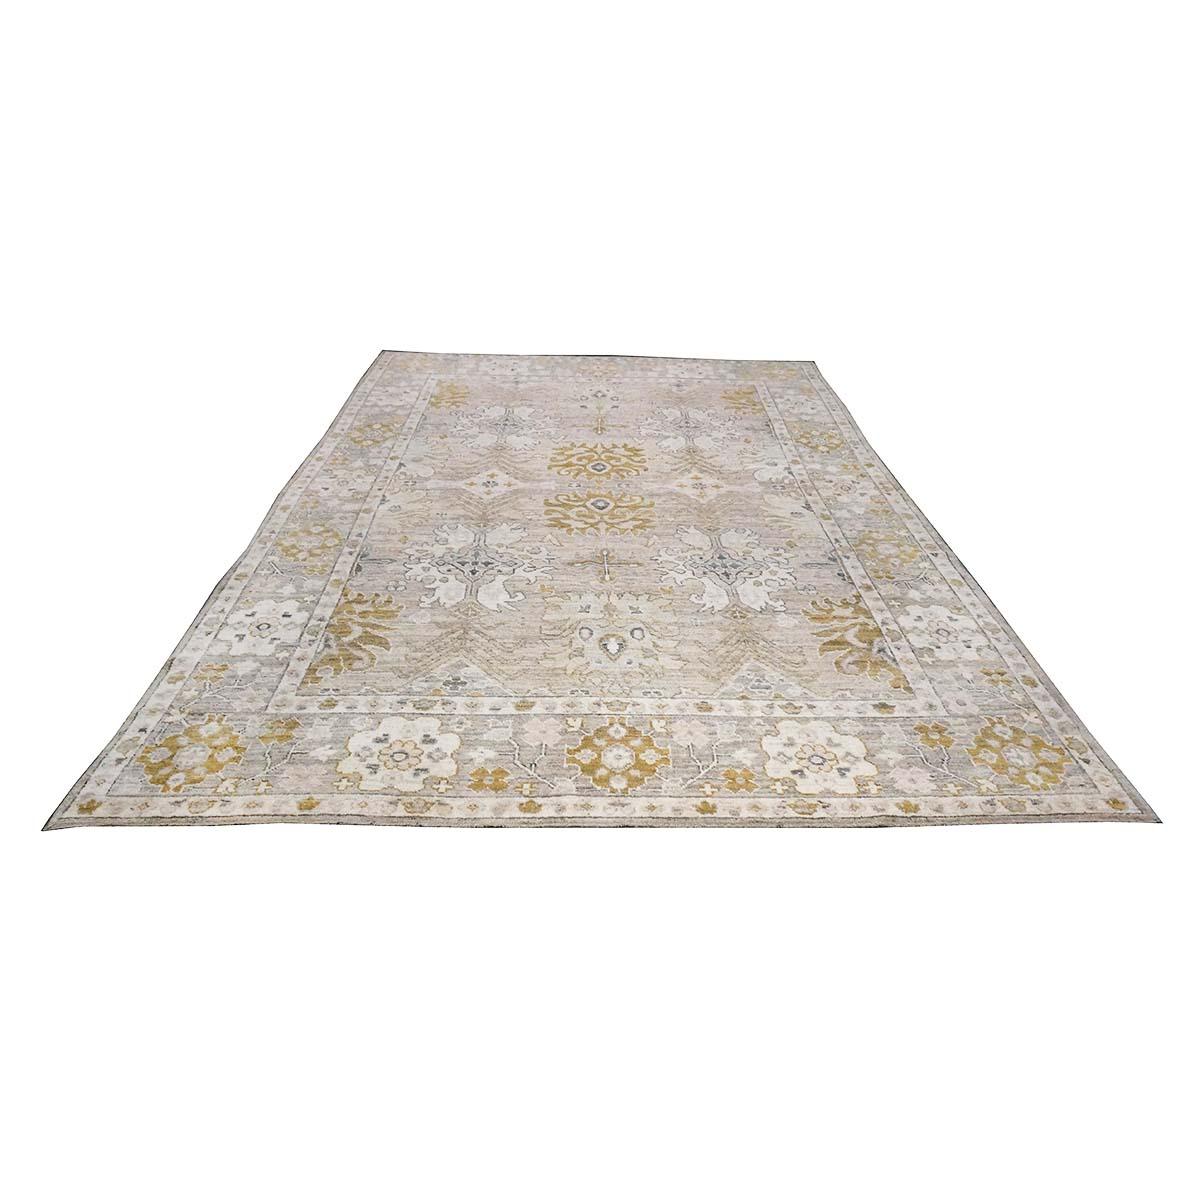 Contemporary 21st Century Turkish Oushak 10x14 Beige, Ivory, & Gold Handmade Area Rug For Sale